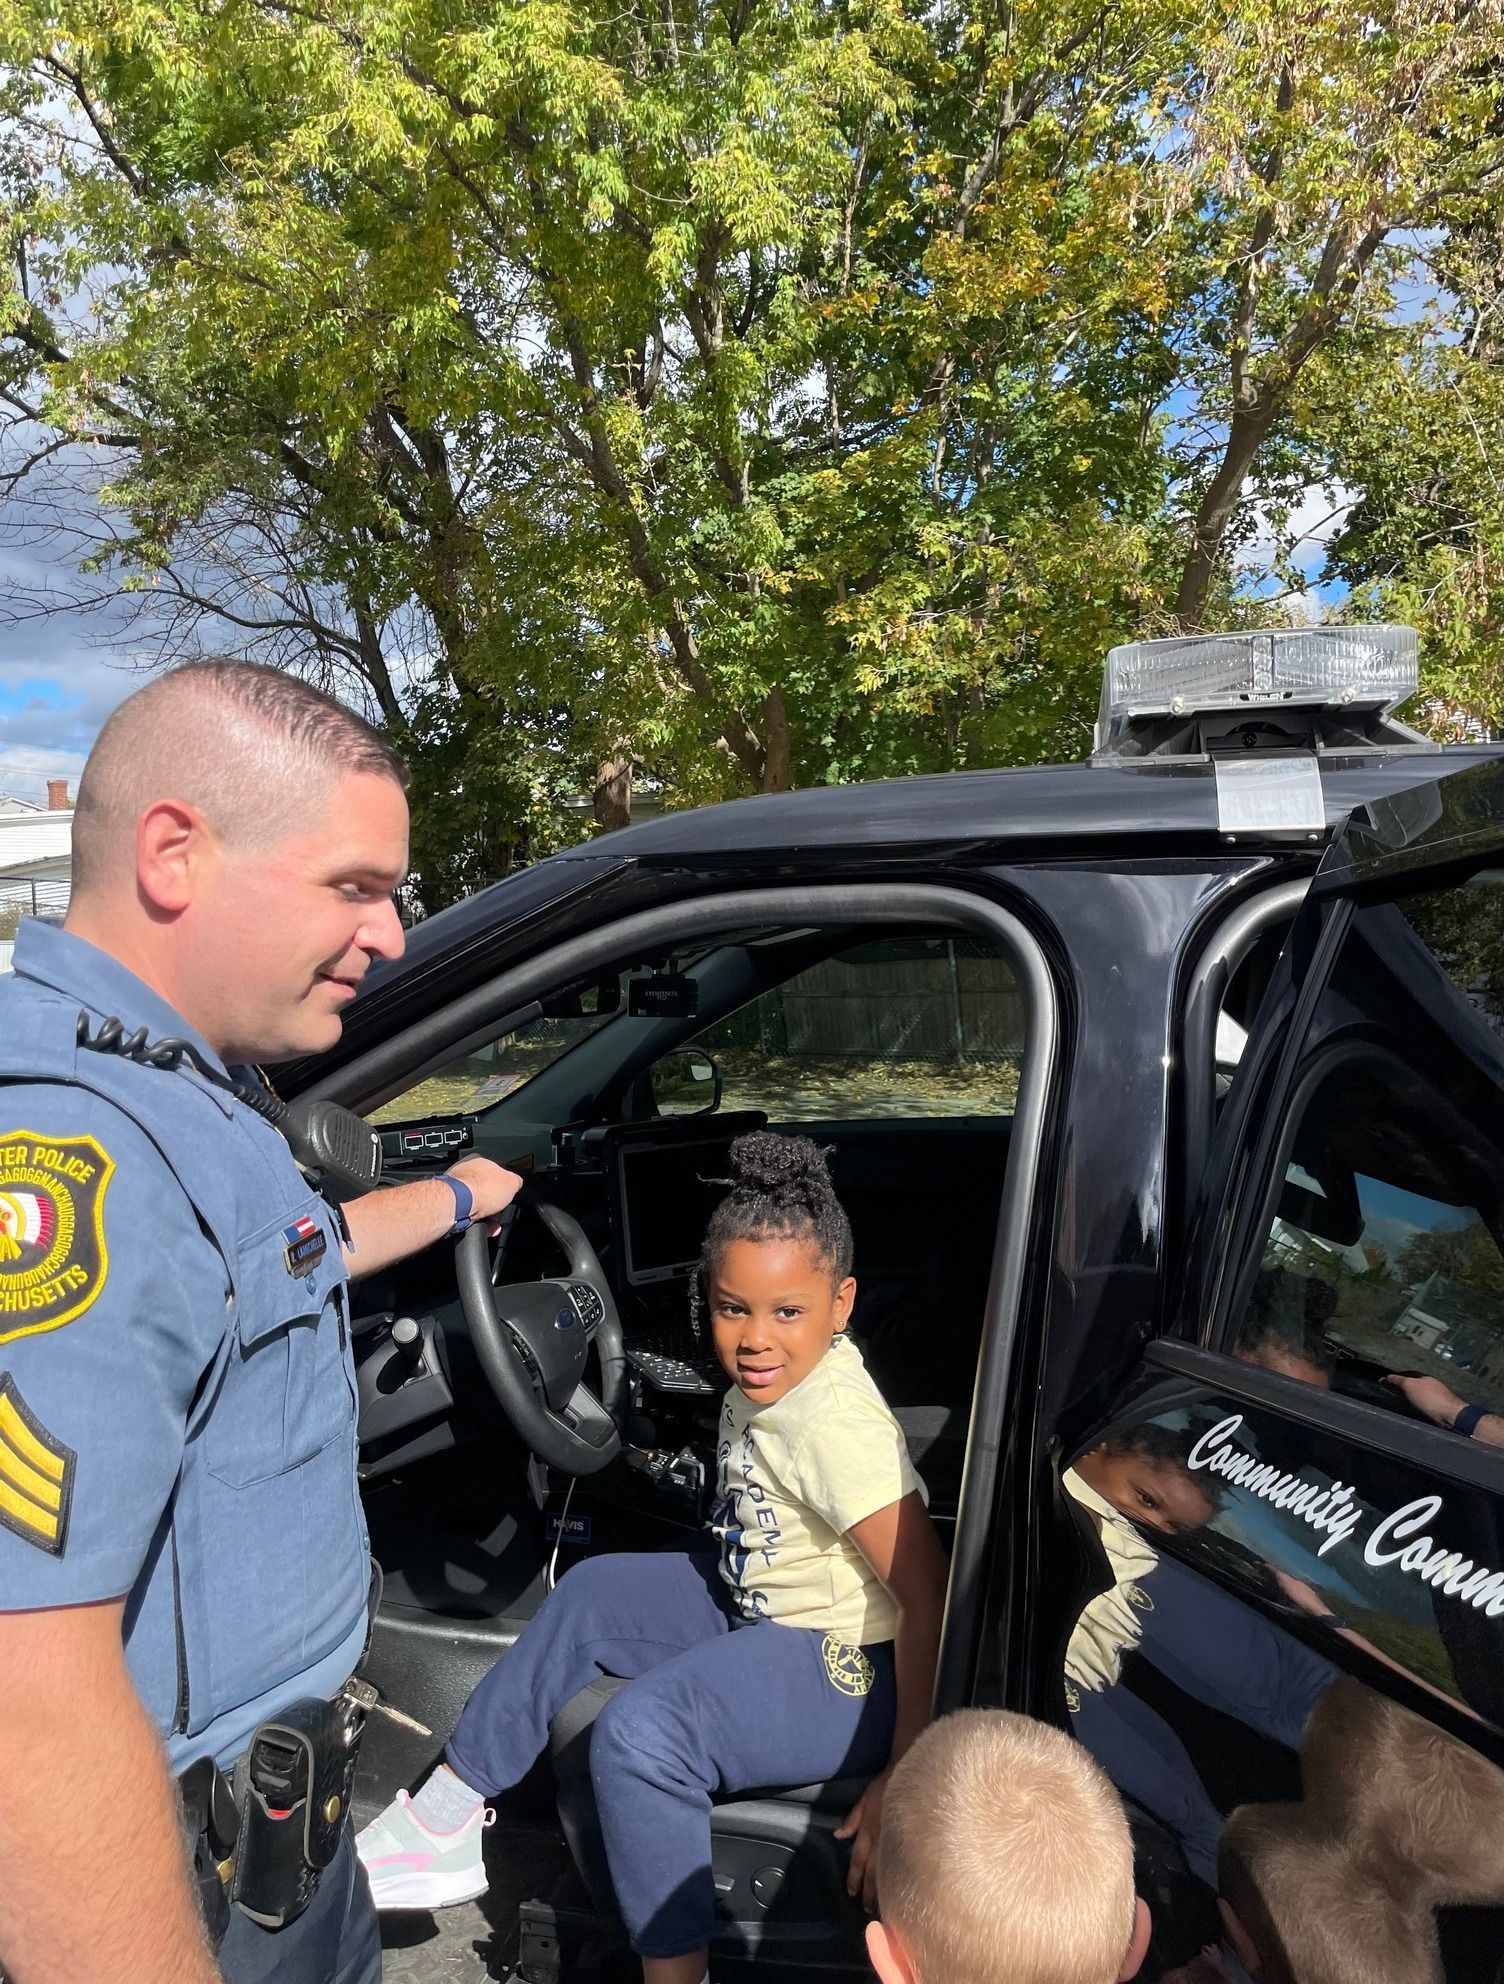 A police officer is standing next to a police car with a little girl sitting in it.